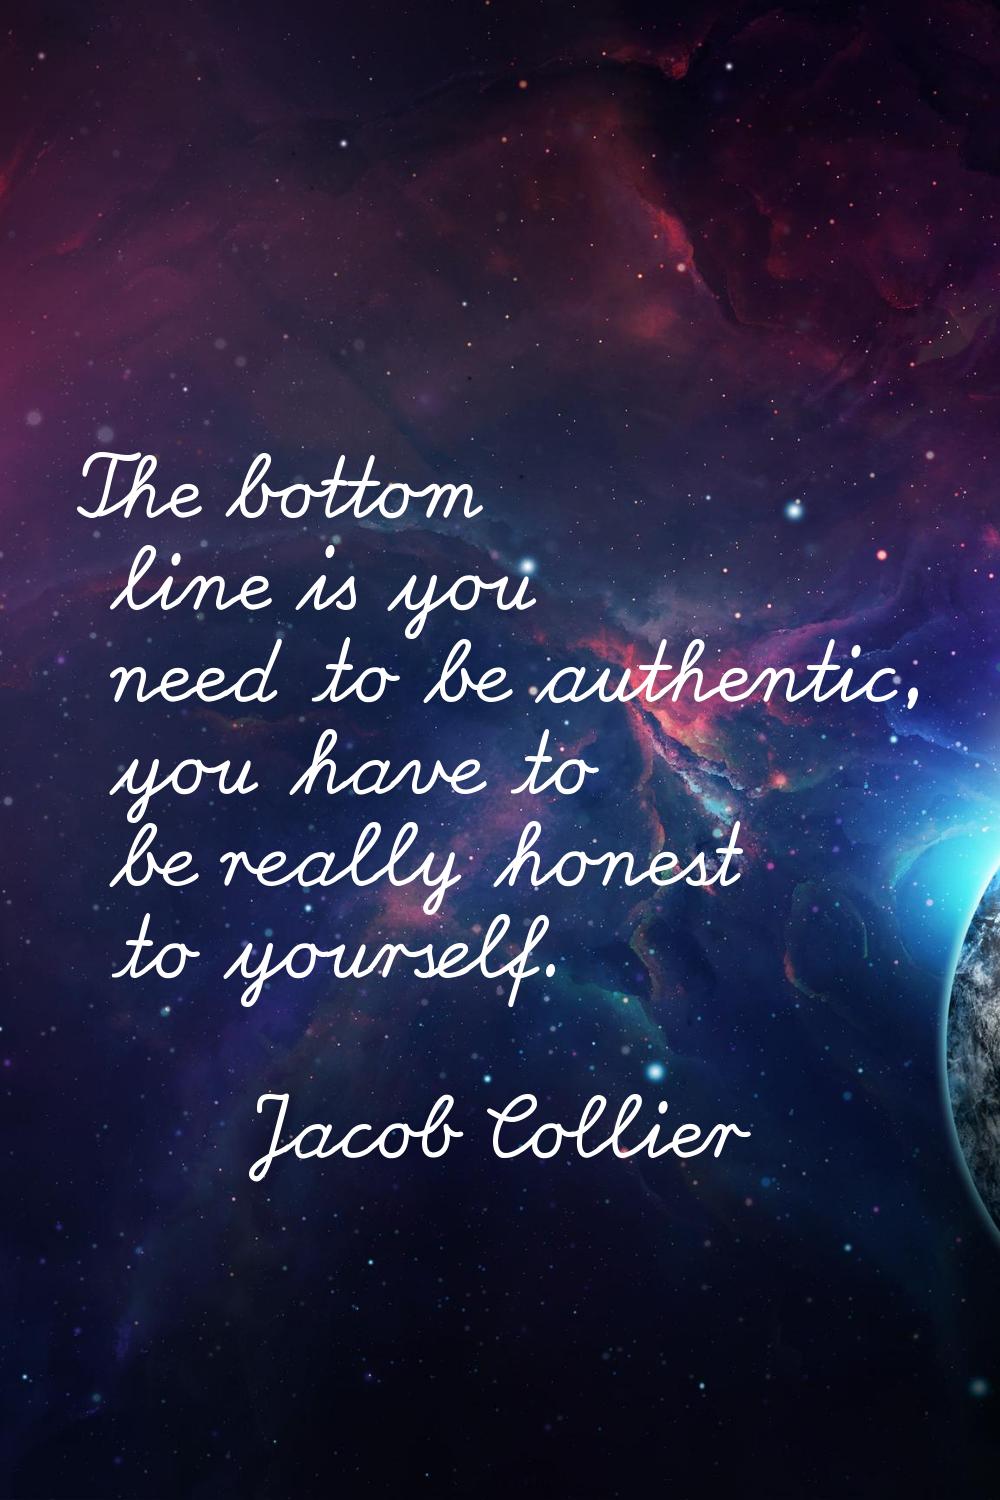 The bottom line is you need to be authentic, you have to be really honest to yourself.